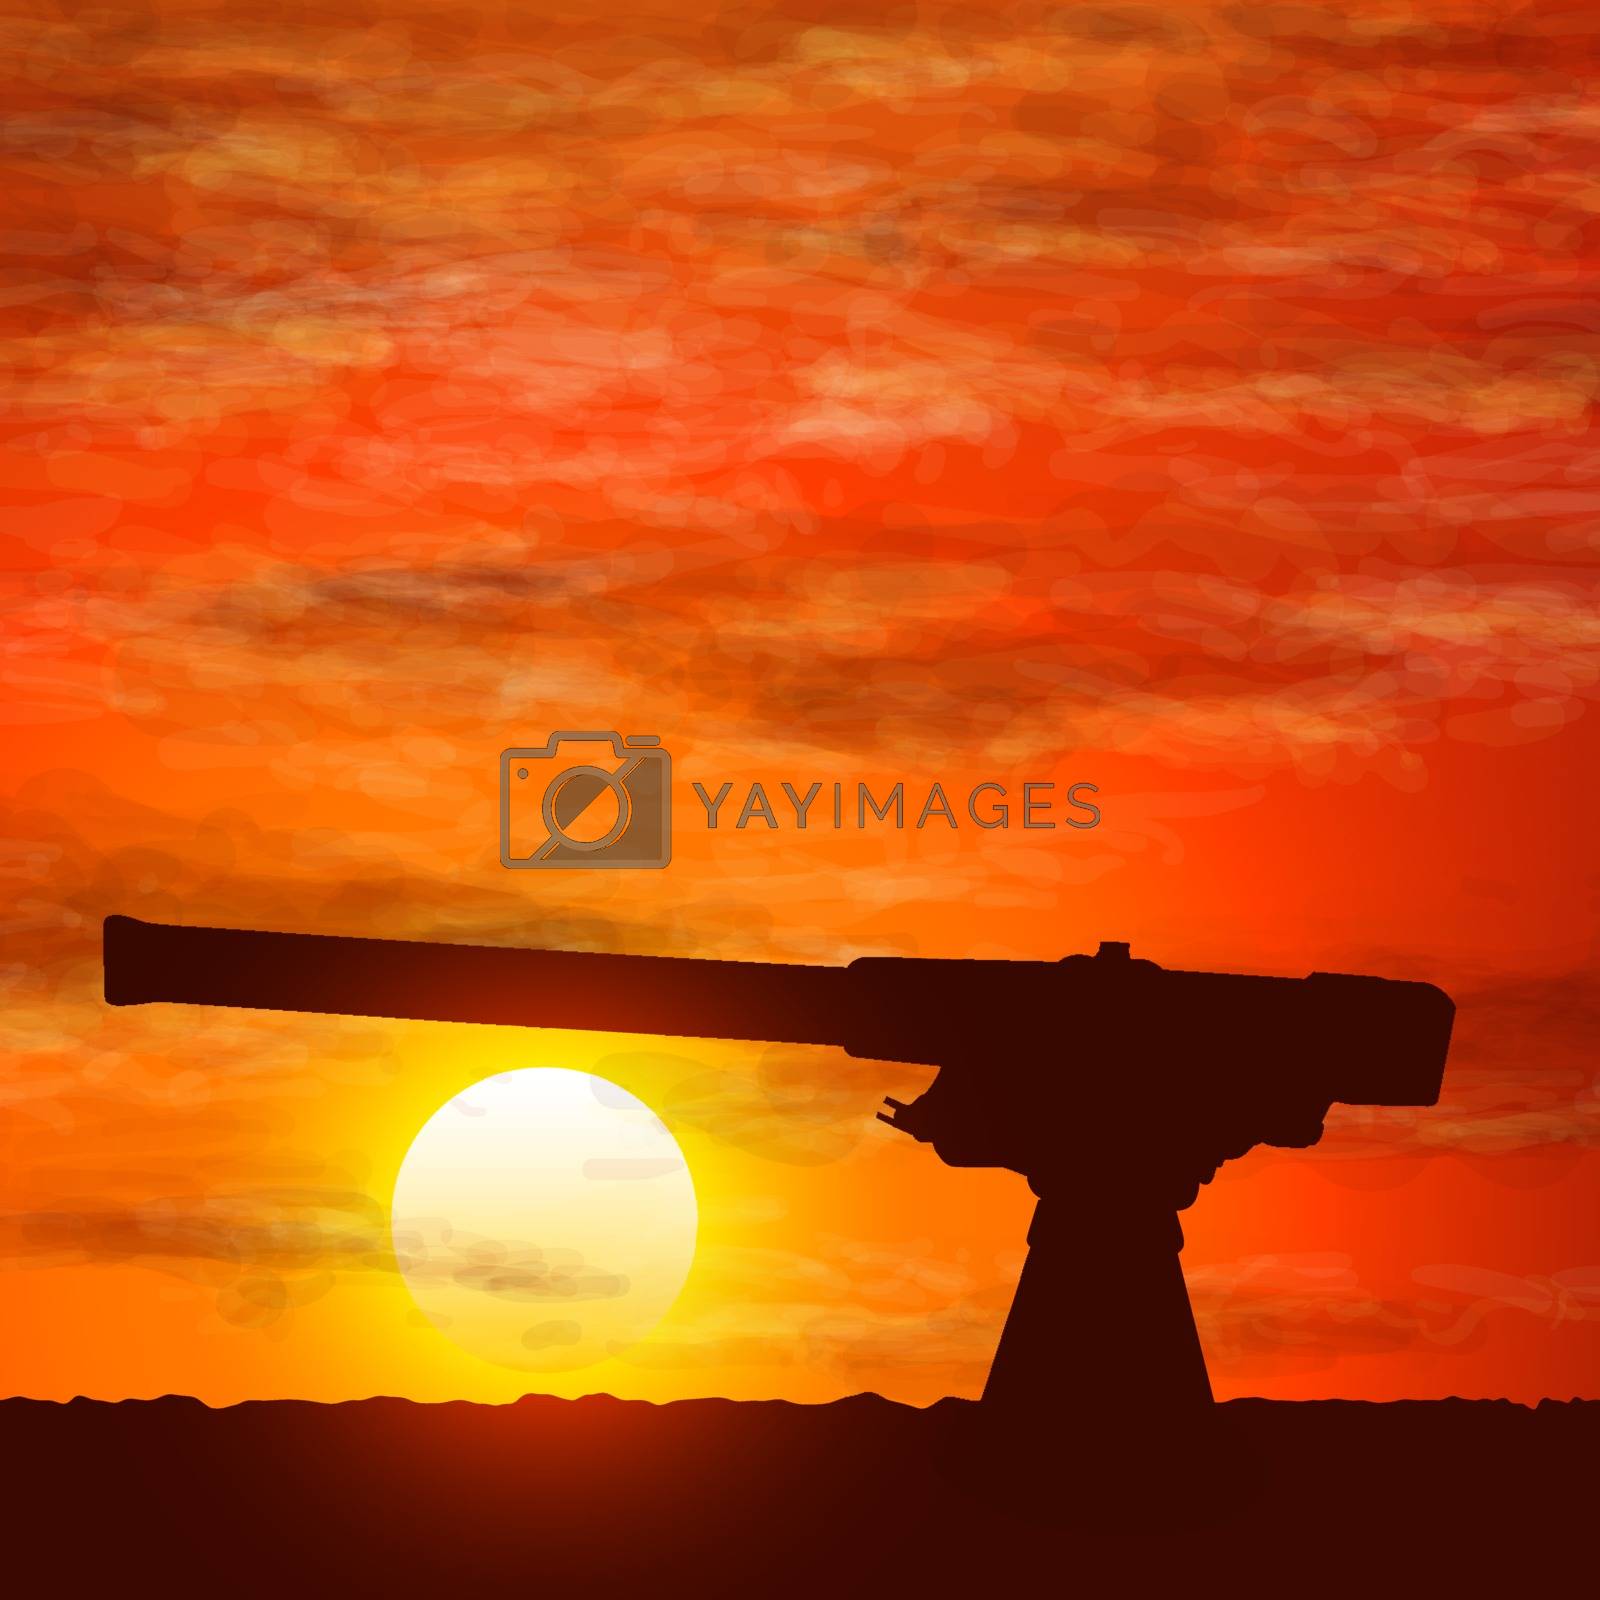 Royalty free image of Silhouette of gun, the symbolize of the war. by narinbg